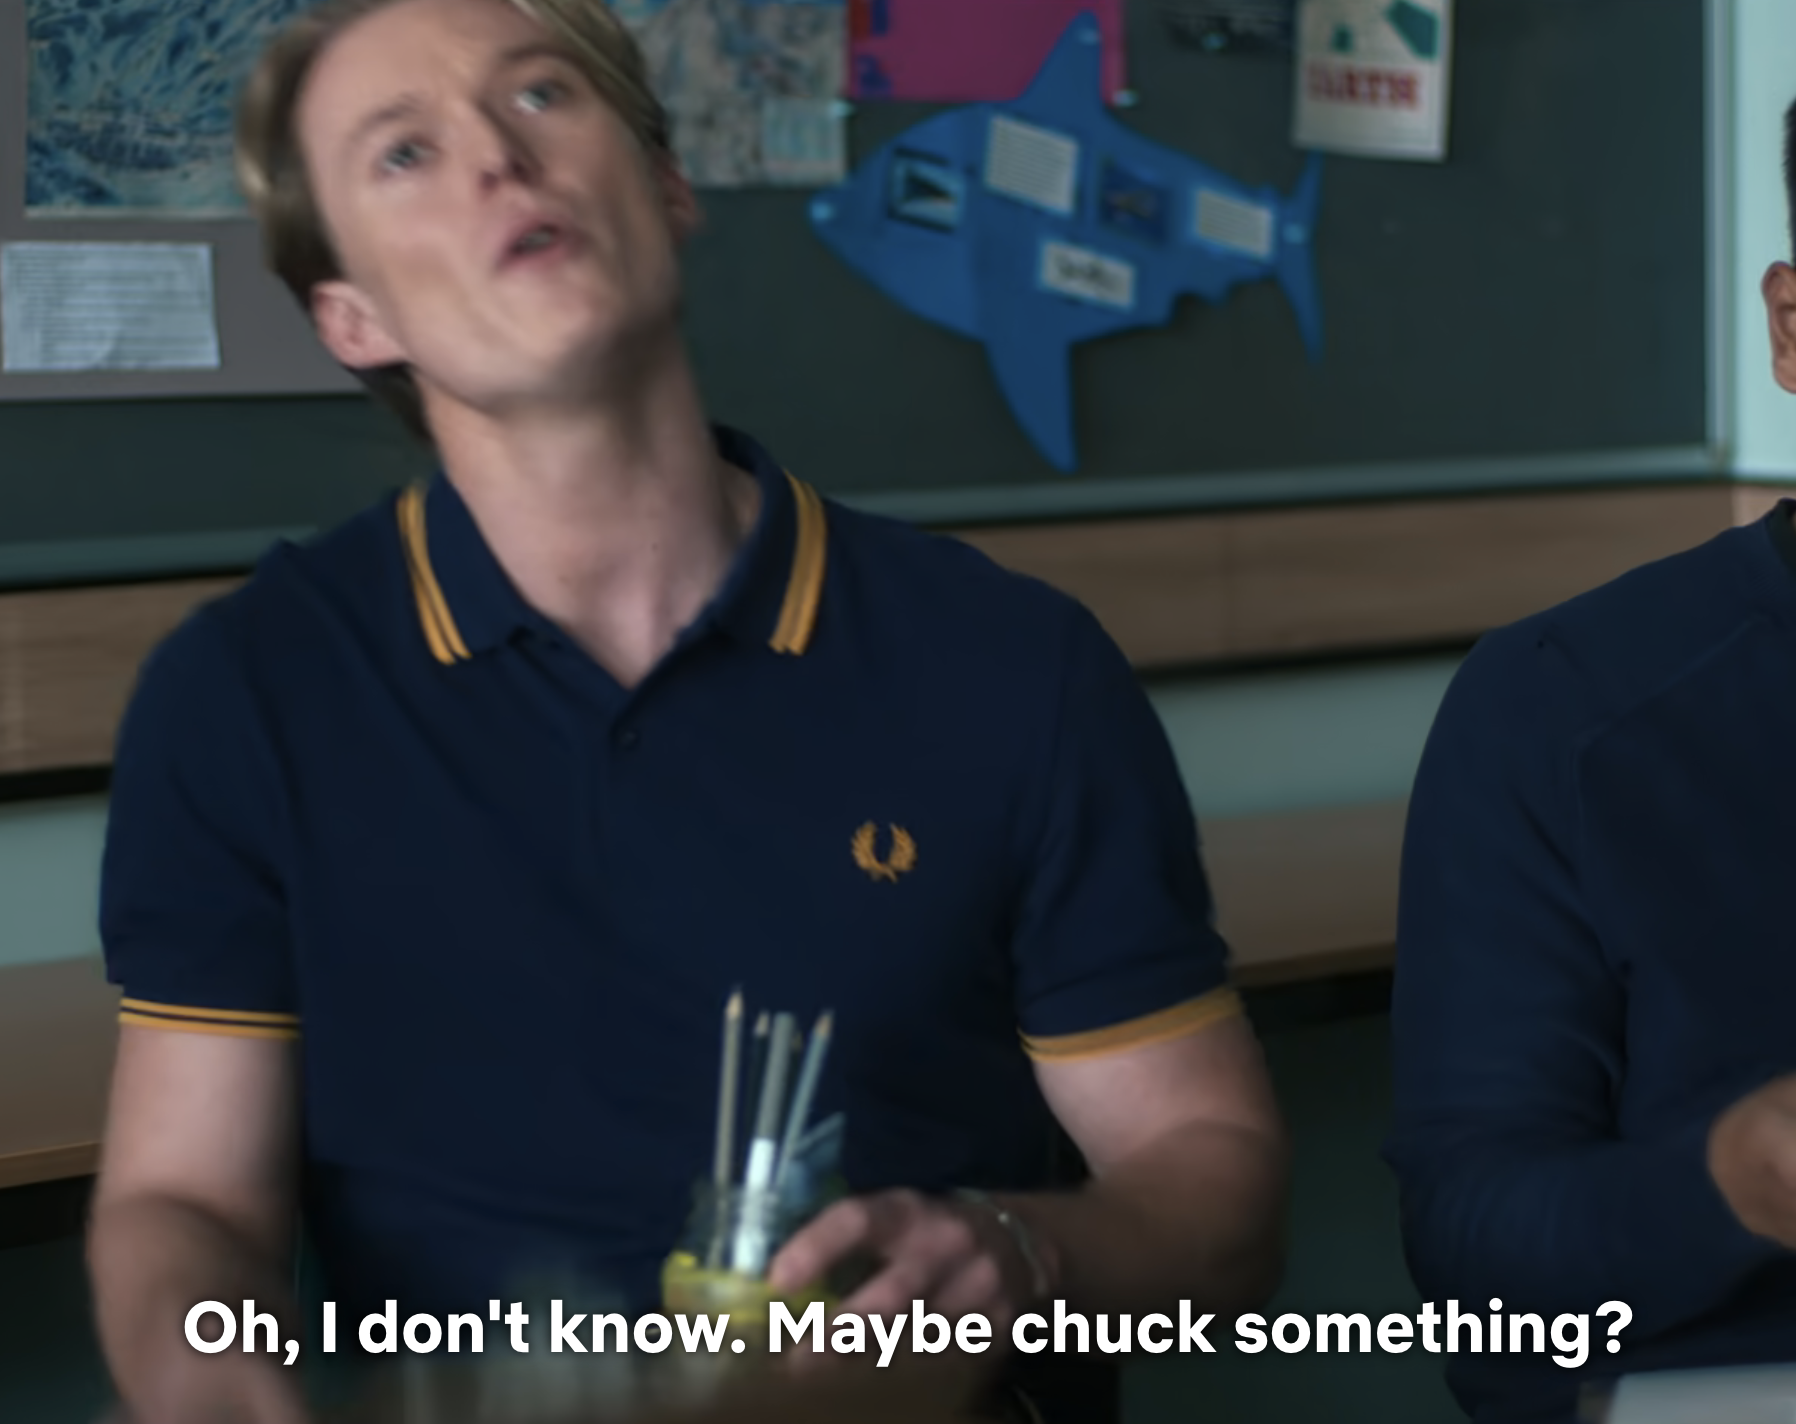 Two persons in a classroom, one gesturing with a puzzled expression and subtitles